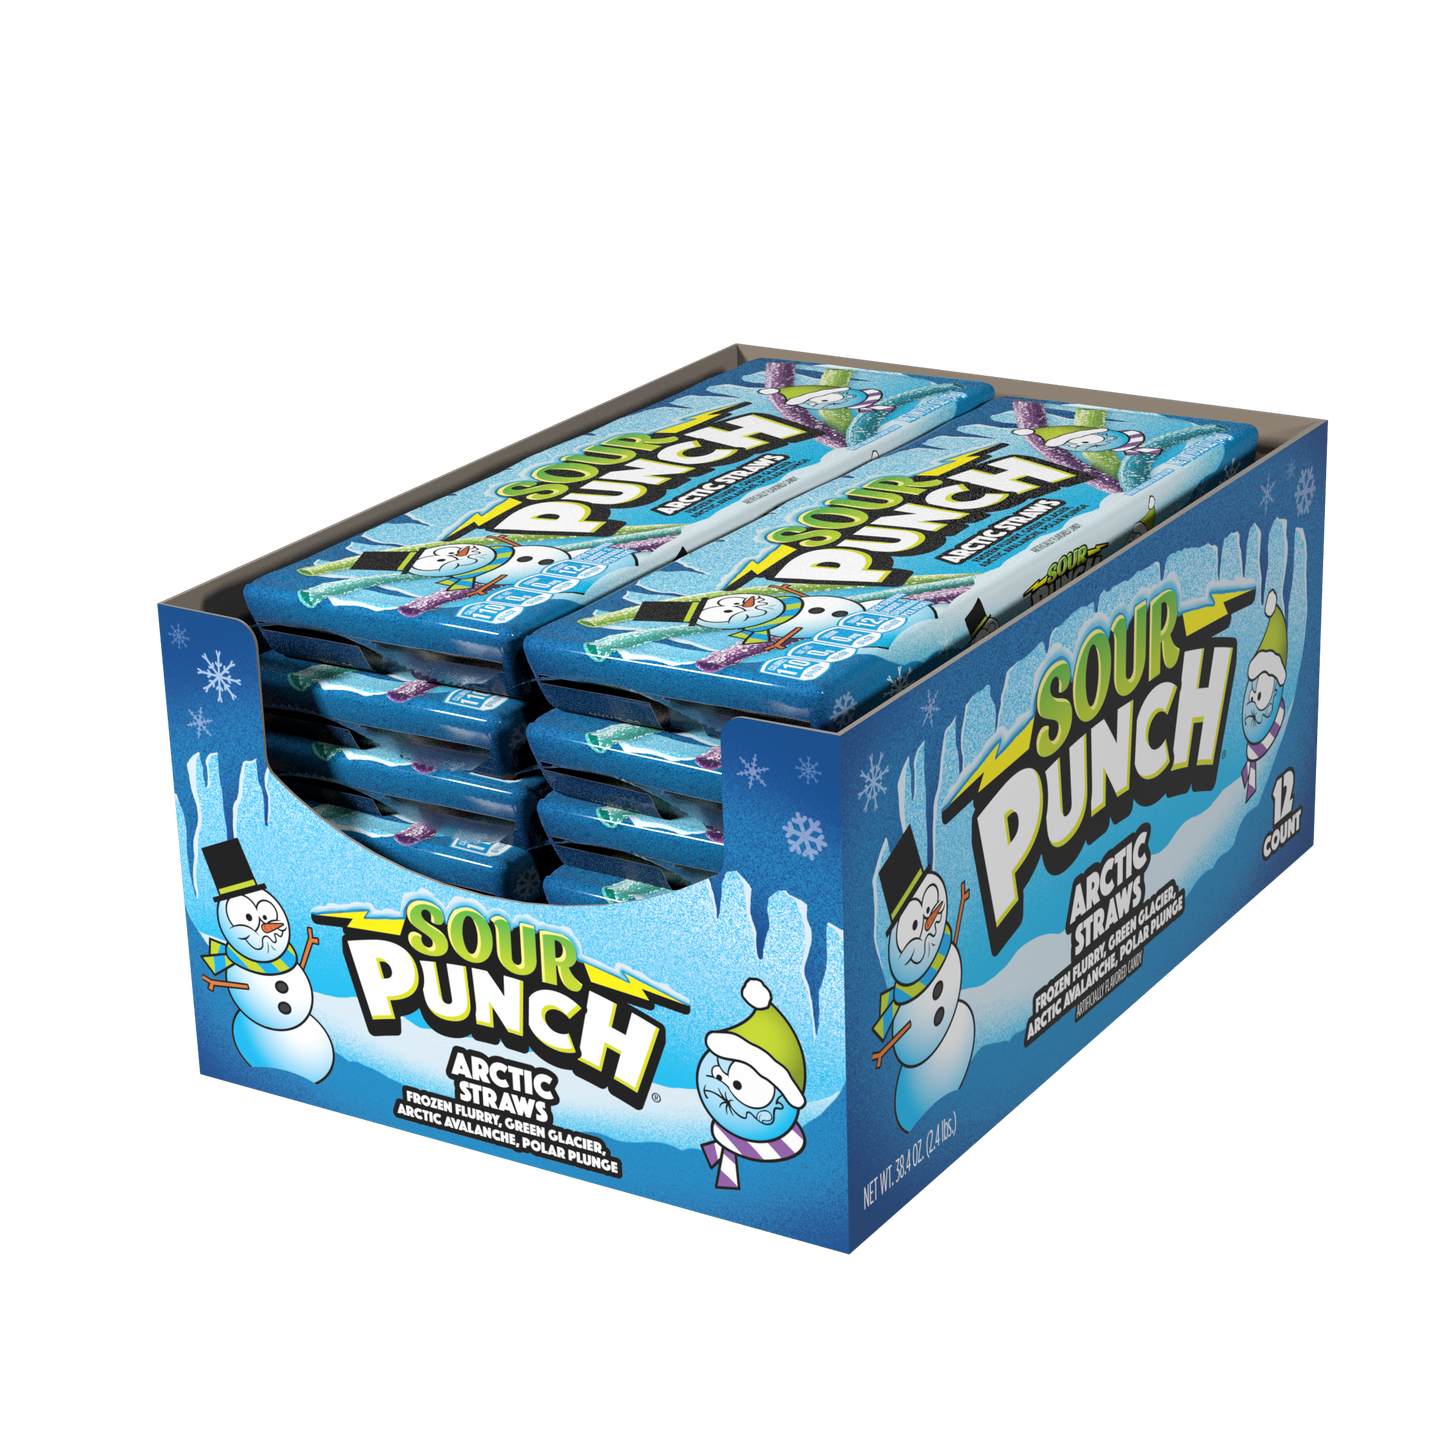 SOUR PUNCH Arctic Straws Holiday Candy - 12 pack of festive candy trays